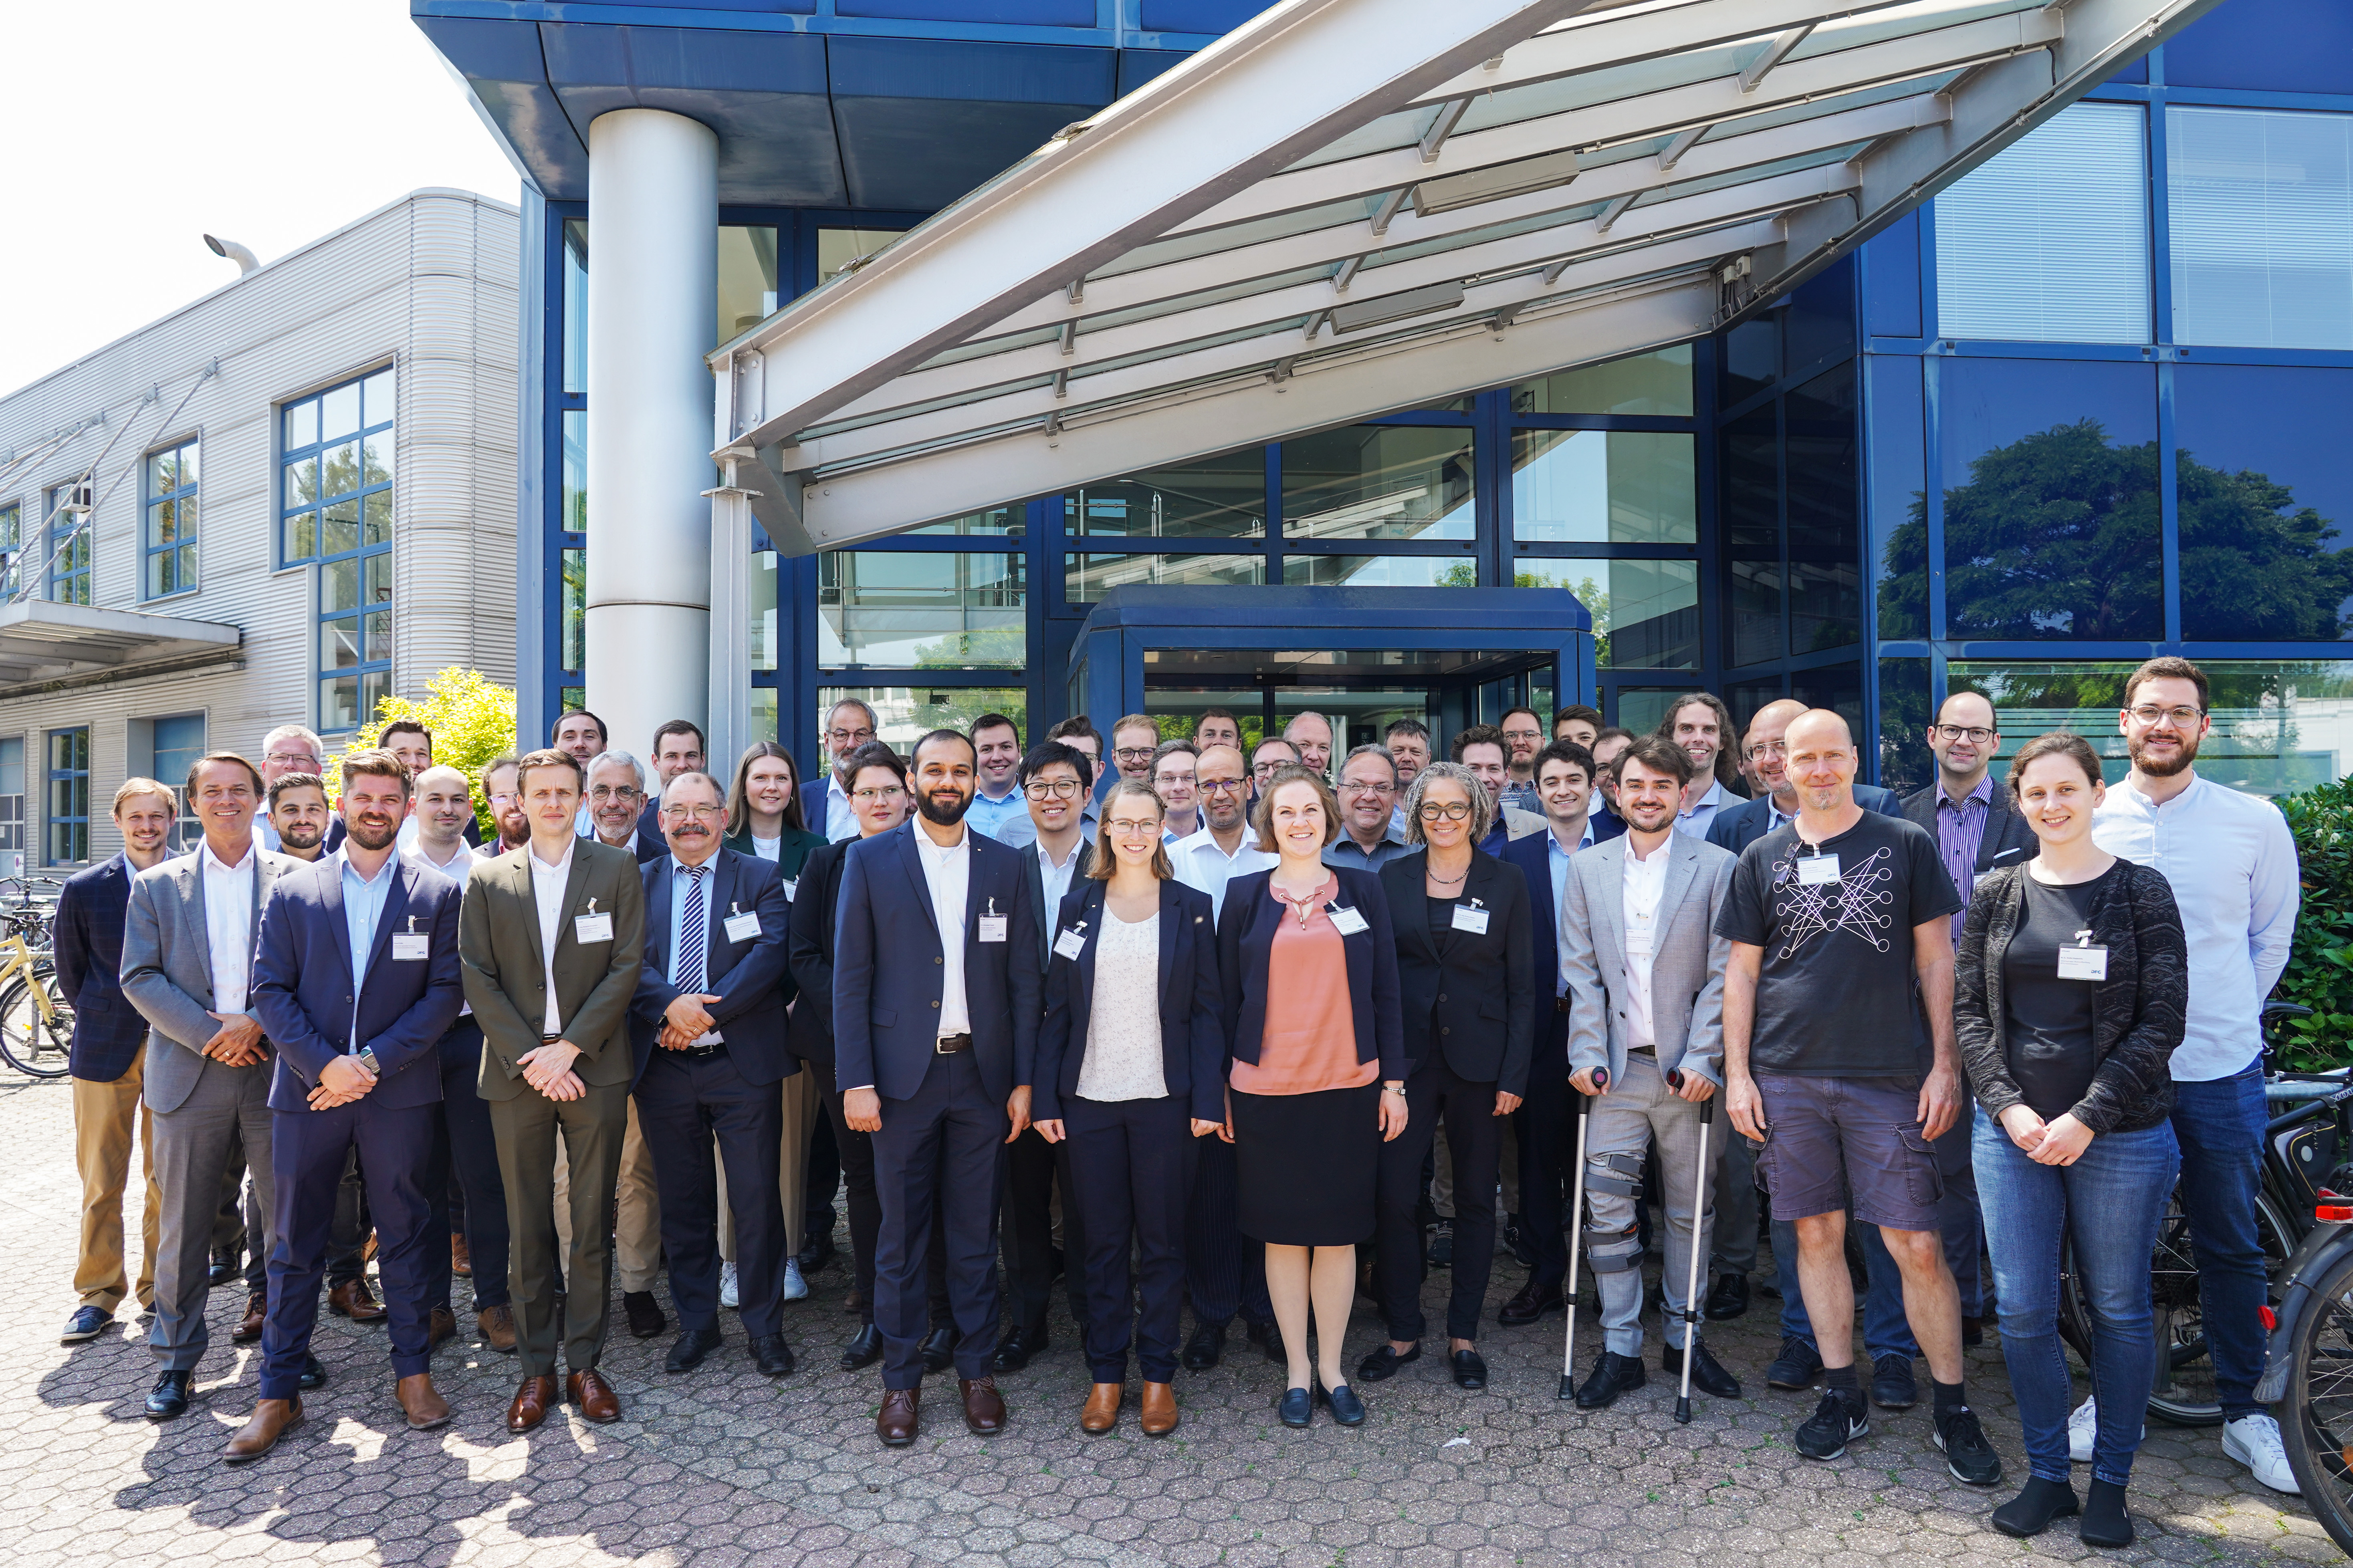 Kick-off Meeting SPP 2402, group photo of the participants institute. Source: IOT RWTH Aachen University